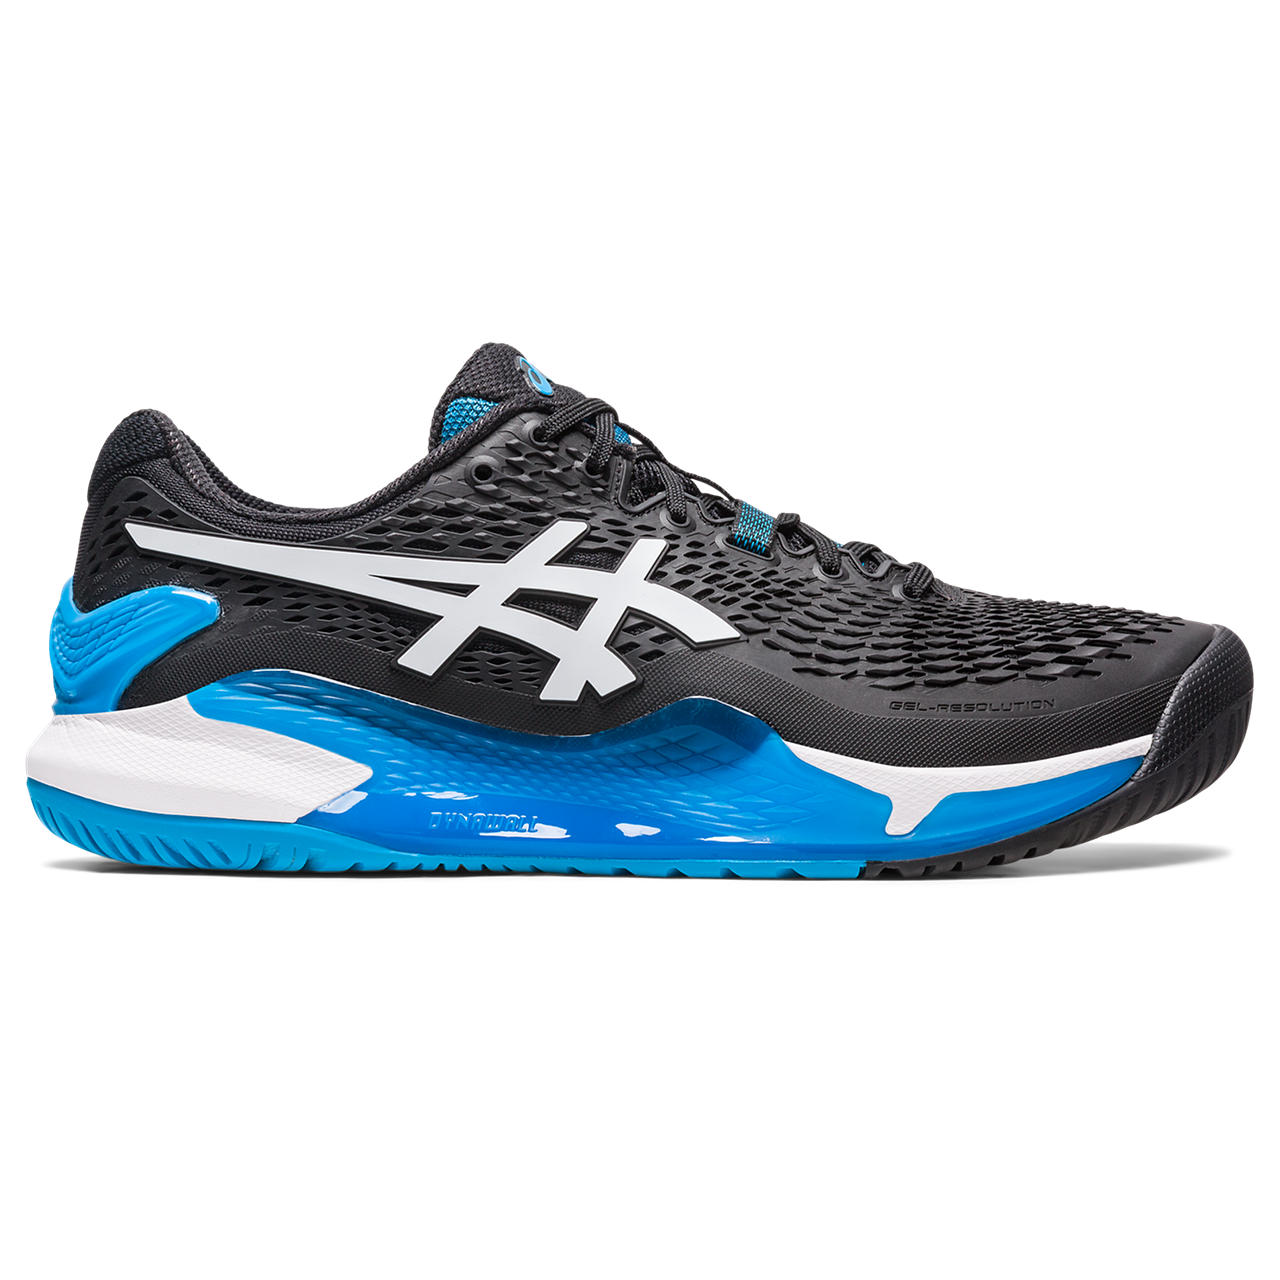 Lateral view of the ASIC Men's Resolution 9 tennis shoe in Black/White